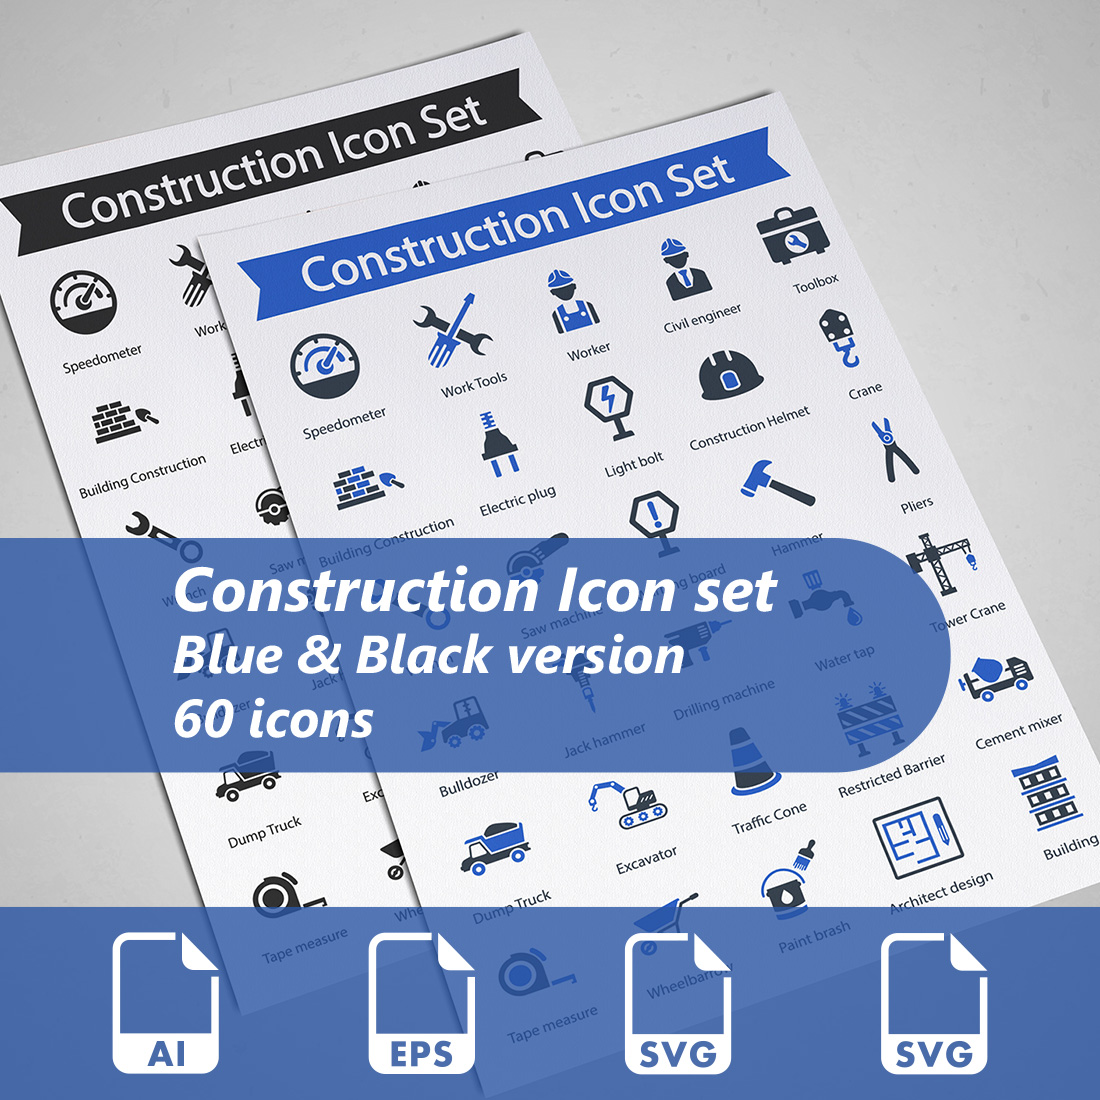 Construction Icon Set cover image.